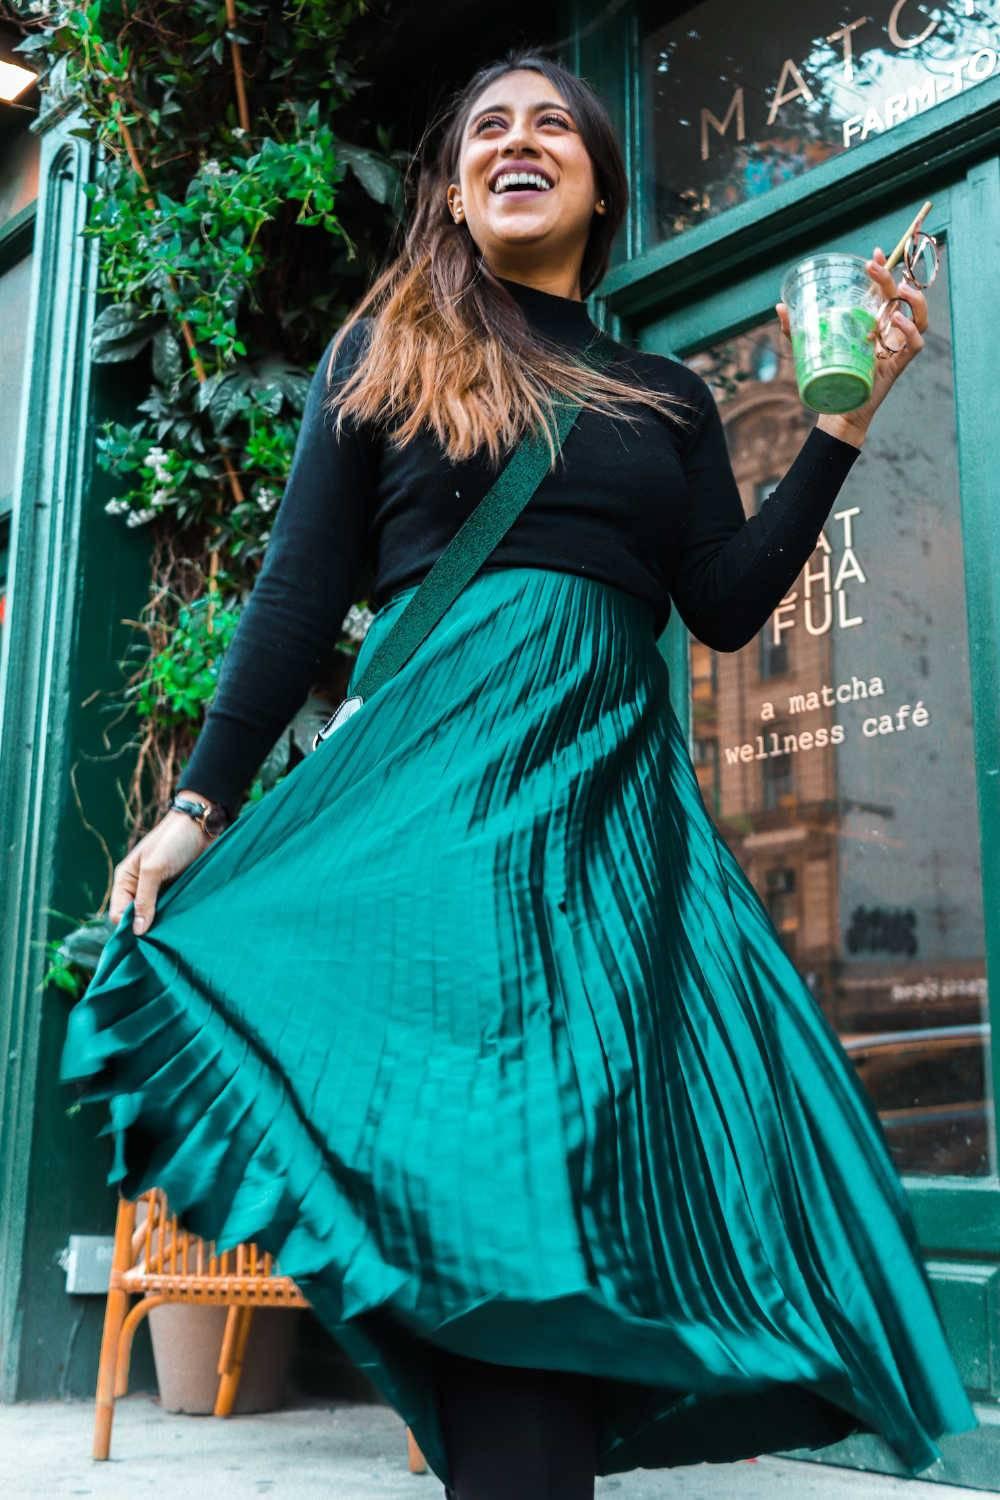 turtleneck green skirt outfit